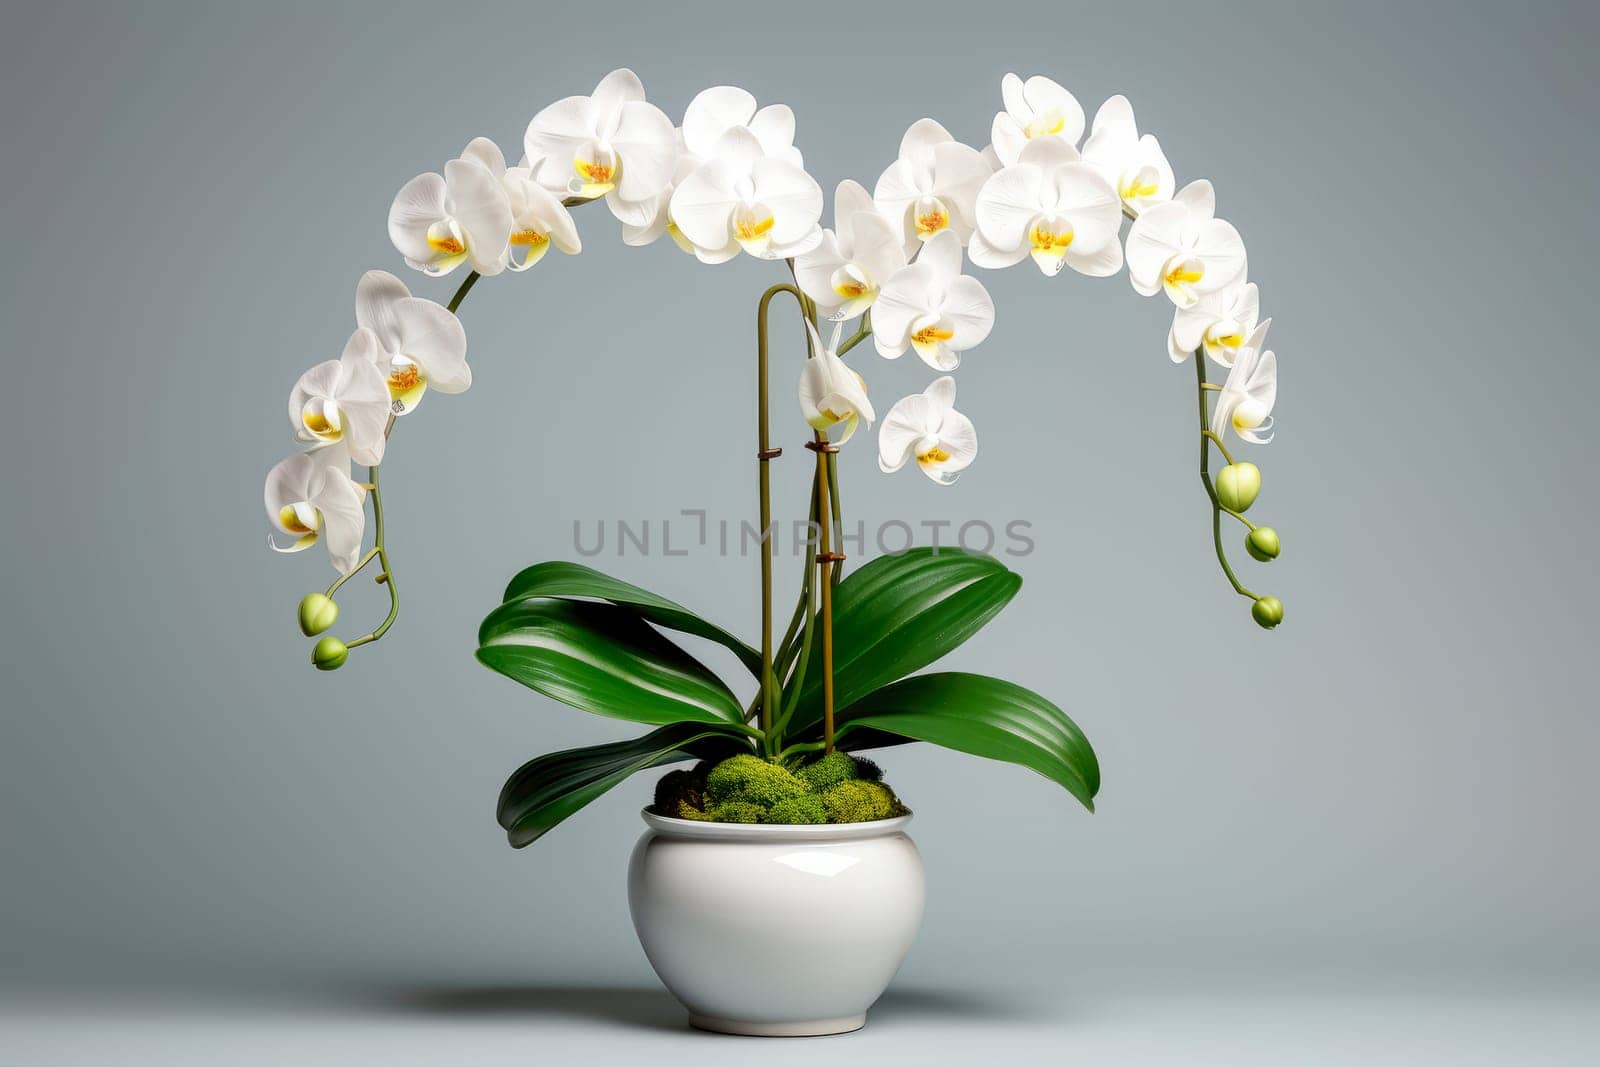 A beautiful white orchid in a pot against a light background with a shadow.